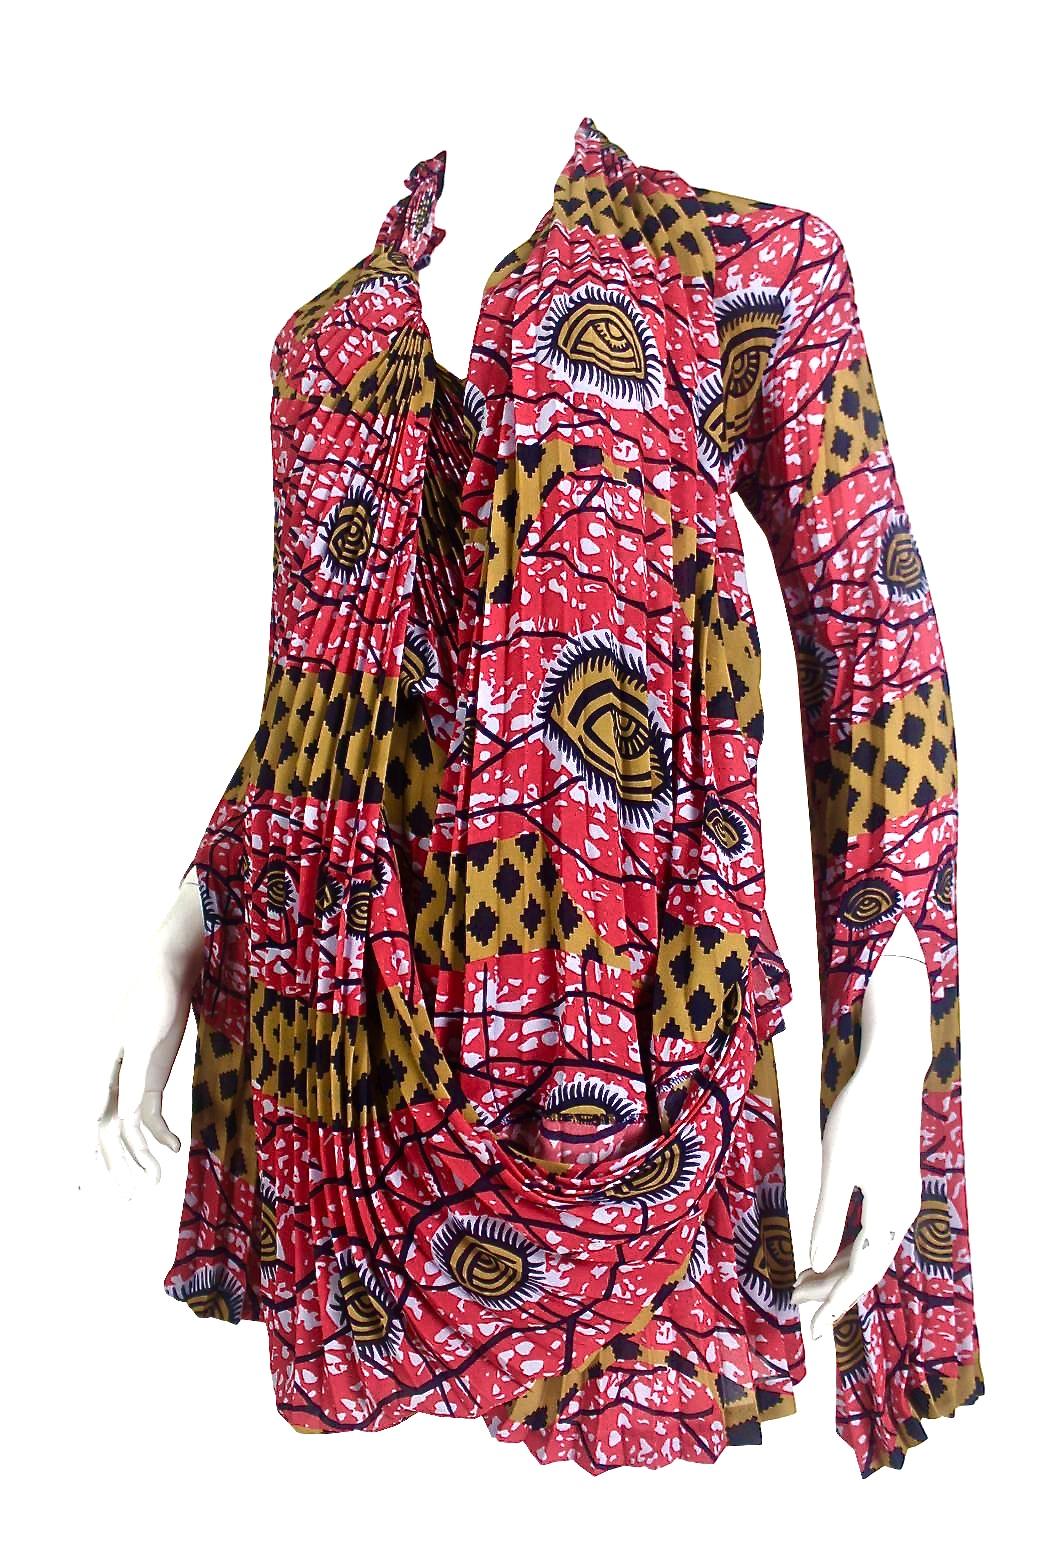 Junya Watanabe Comme des Garcons
AD 2009 African Open Back Print Dress
Labelled Size S
Ad Tag Removed